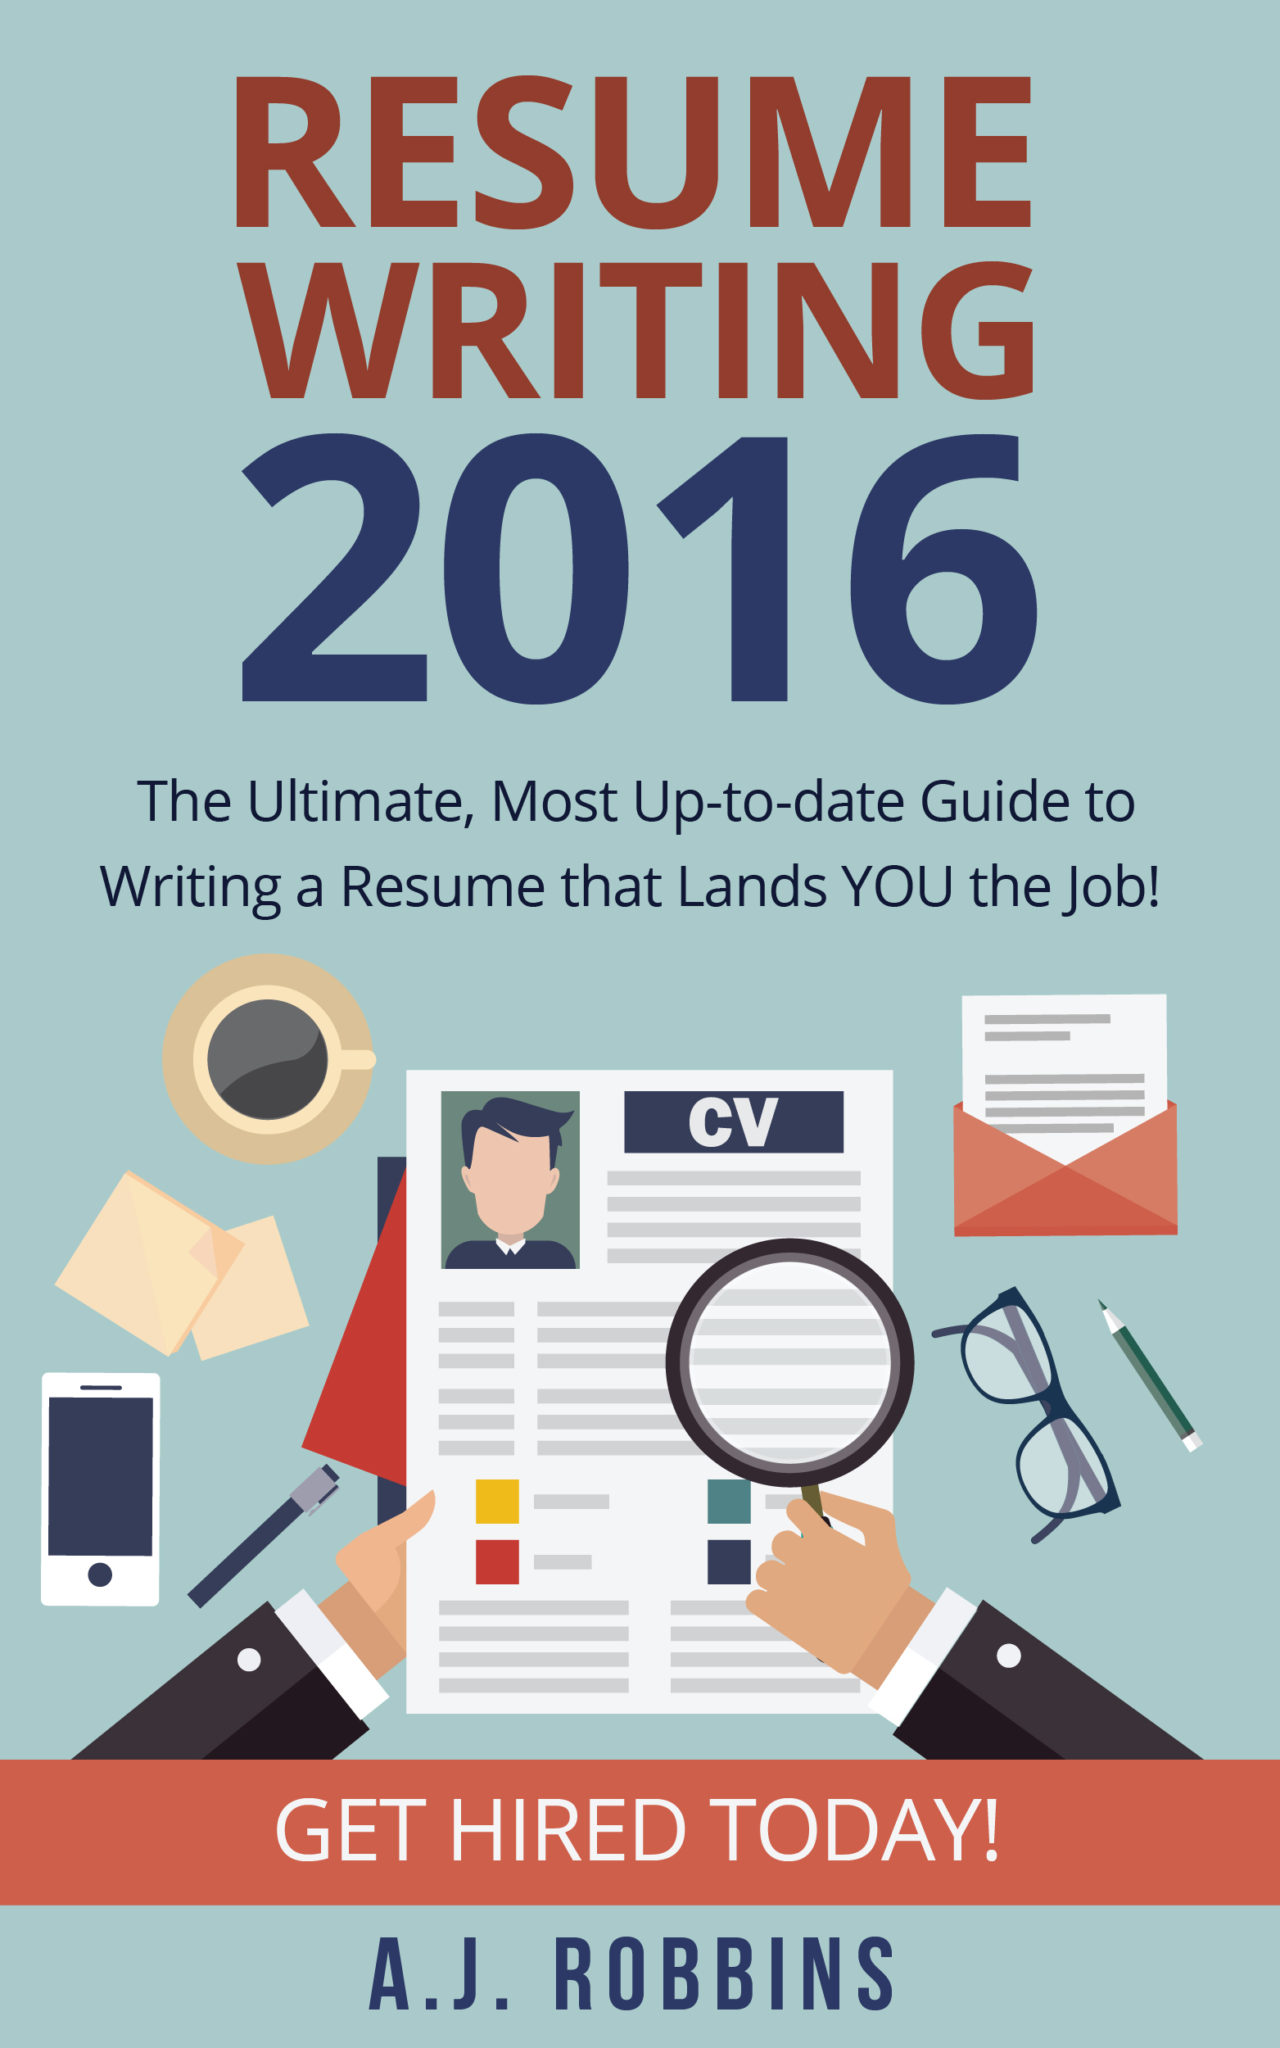 FREE: Resume: [ORIGINAL] Writing 2016 The ULTIMATE, Most Up-to-date Guide to Writing a Resume that Lands YOU the Job! by A.J. Robbins